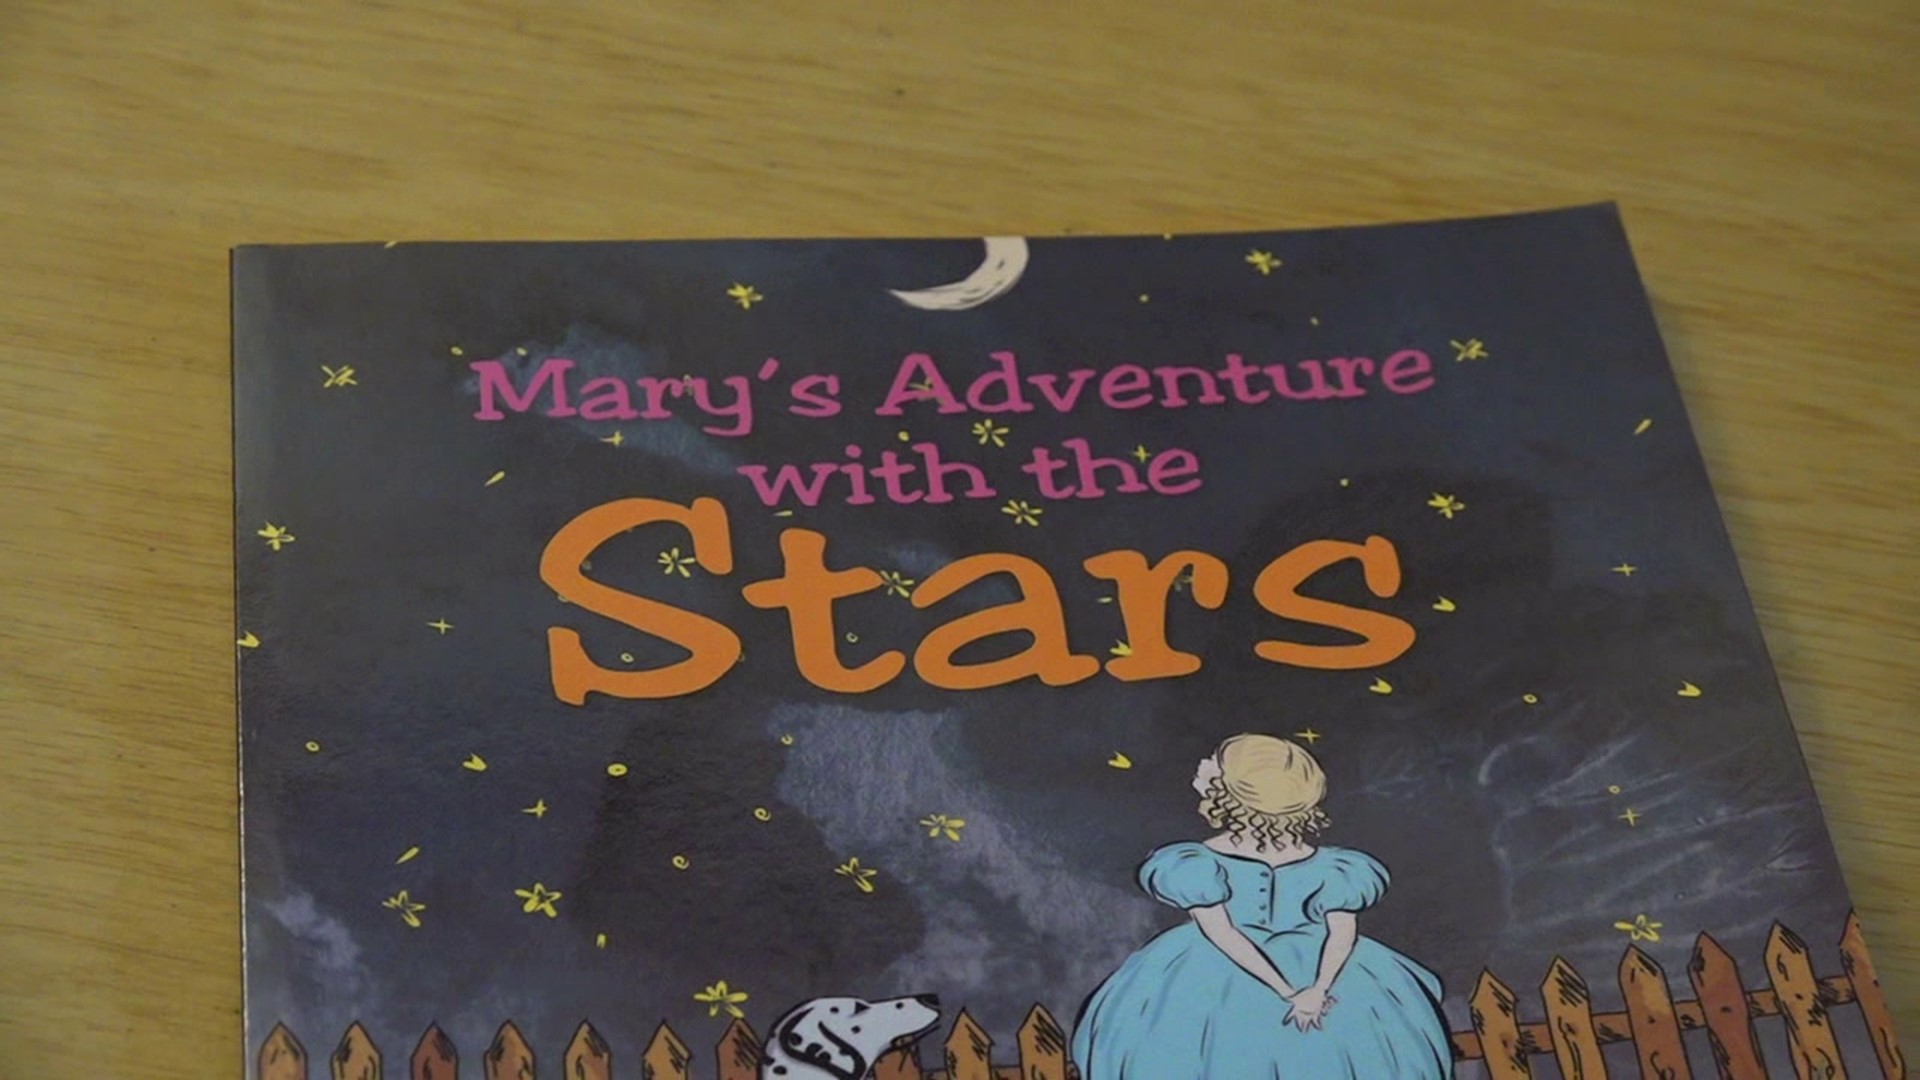 A former science teacher from Pottsville Area High School is spending his retirement teaching astronomy in a different way through a children's book.